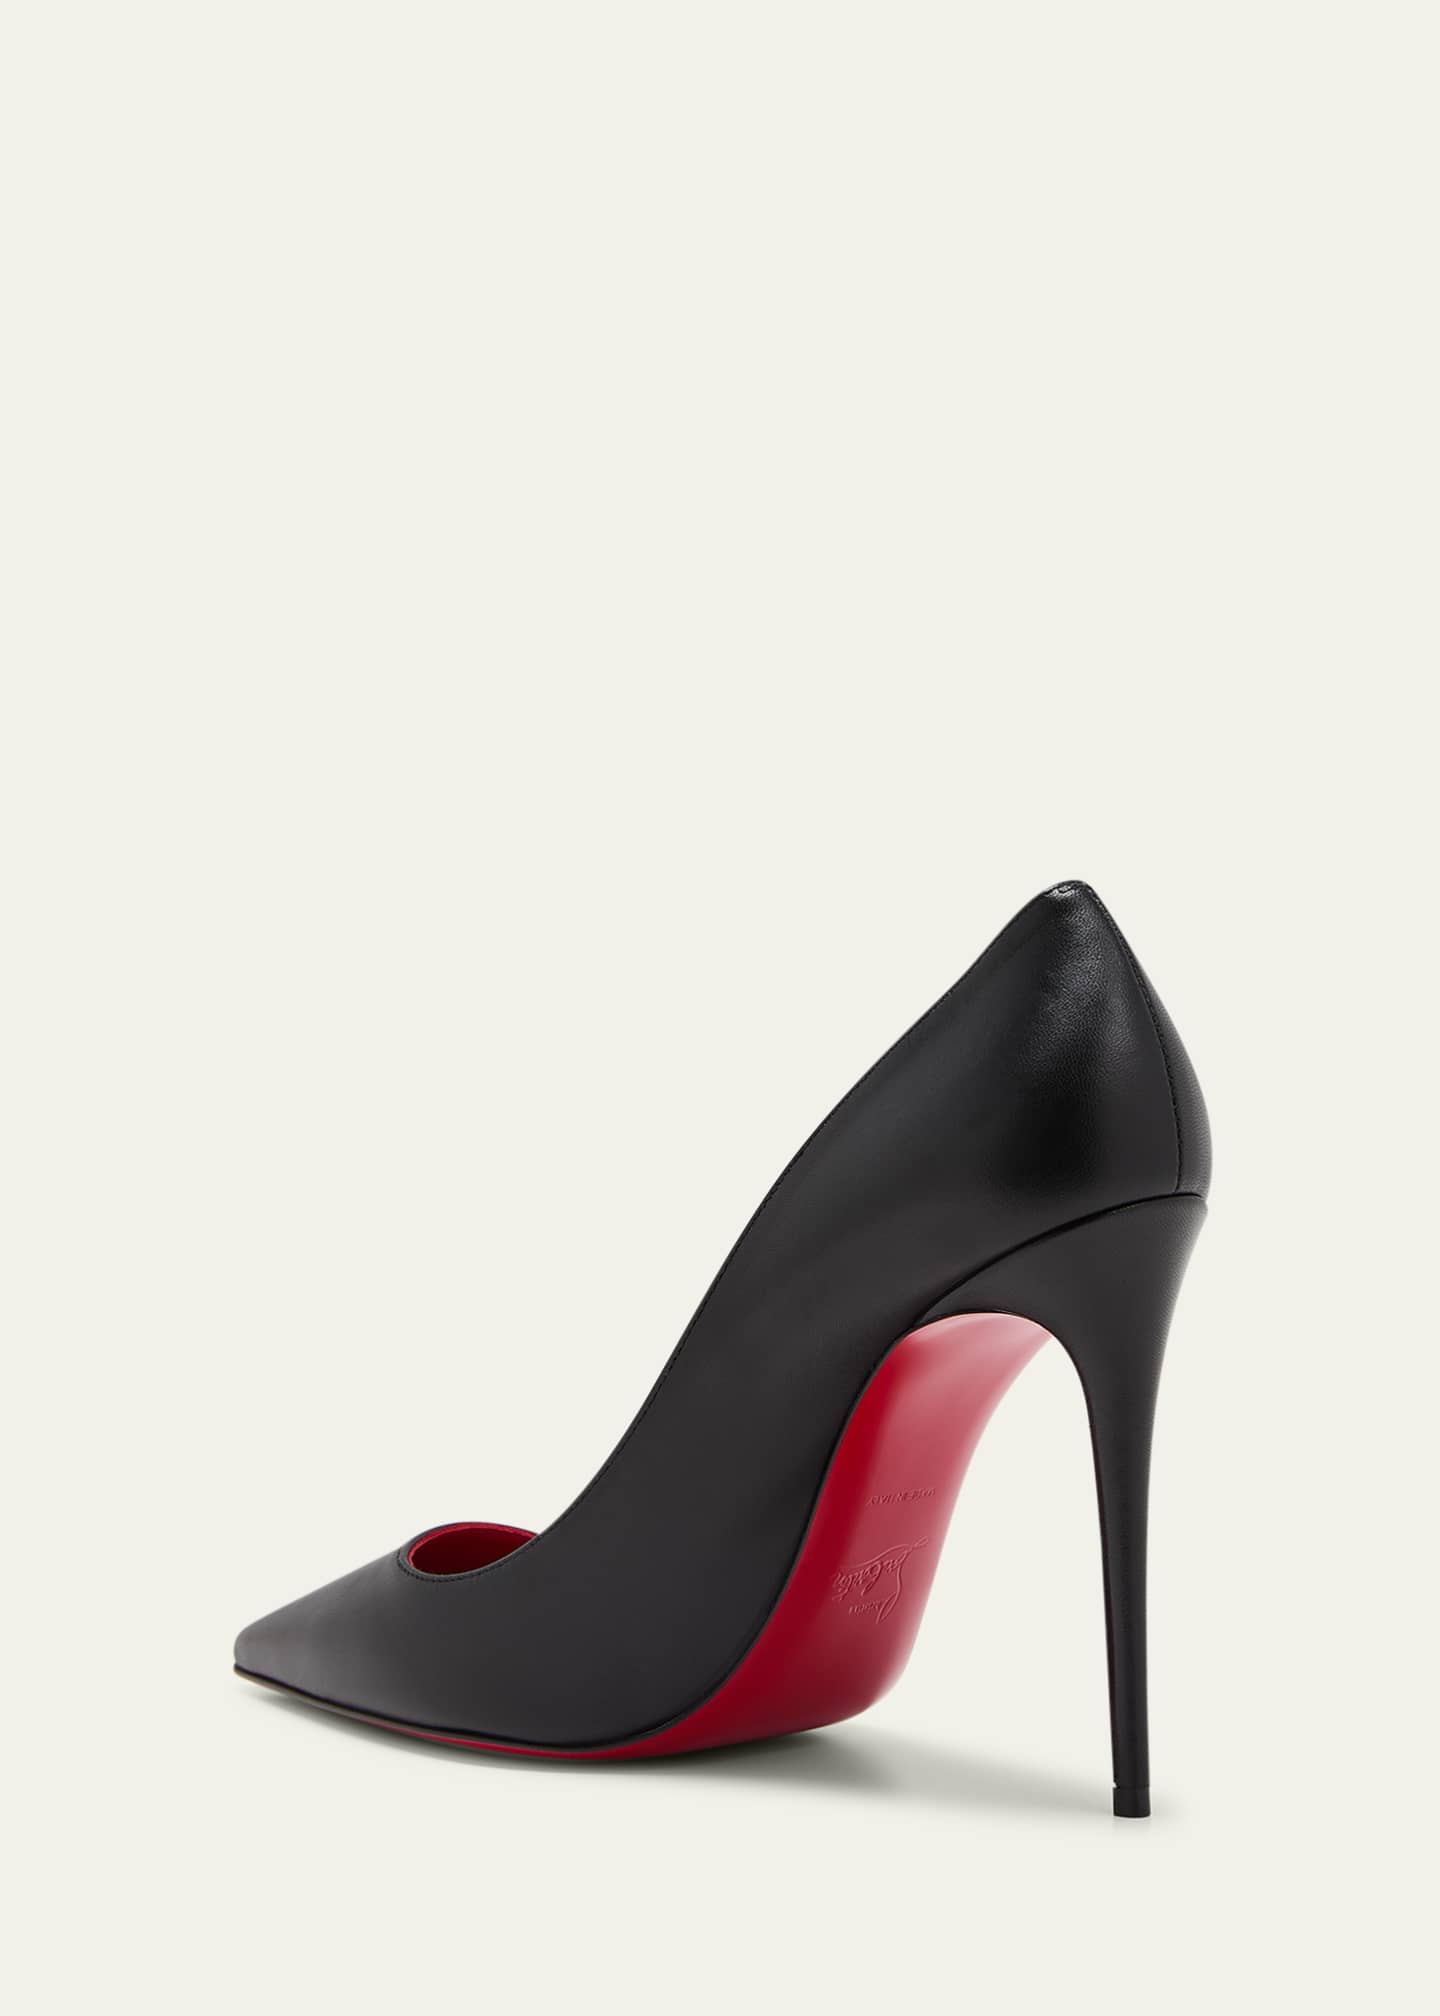 Christian Louboutin, Shoes, Christian Louboutin So Kate Red Bottoms